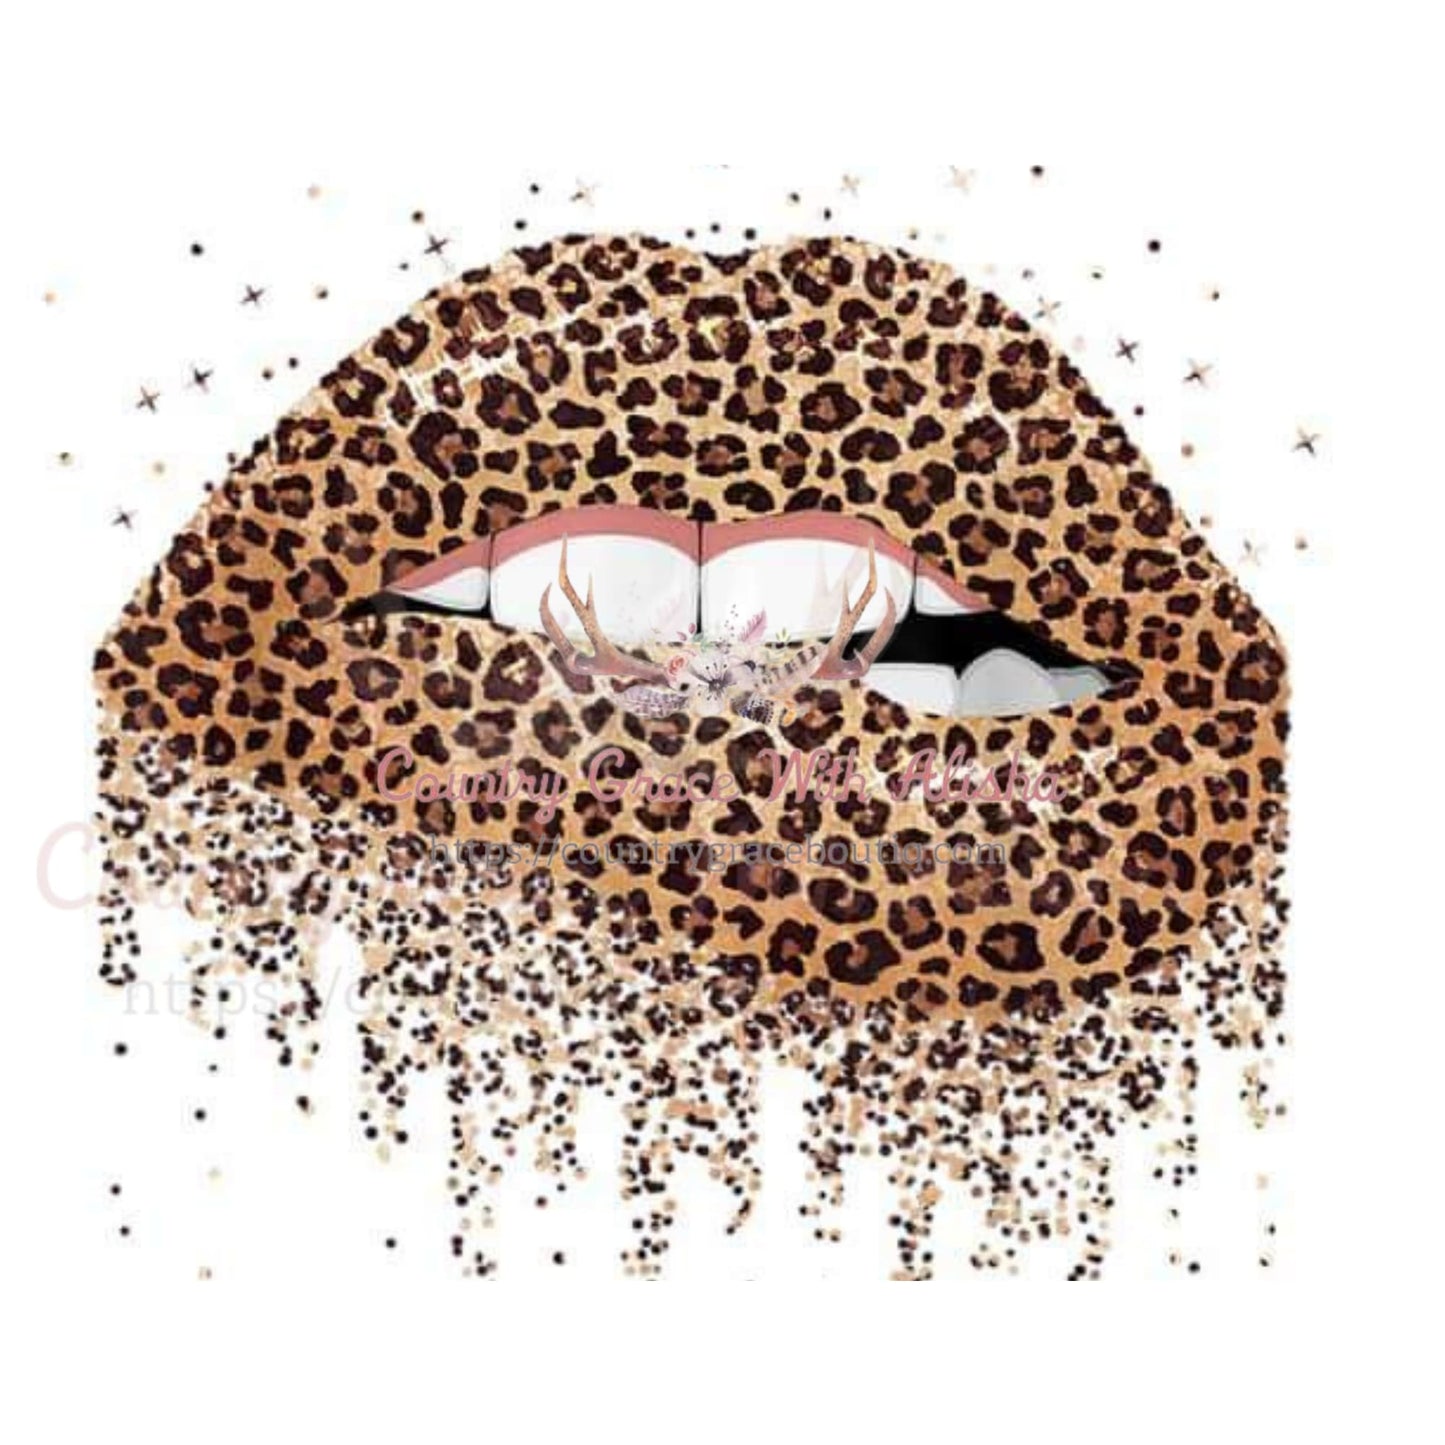 Leopard Lips Sublimation Transfer - Sub $1.50 Country Grace 